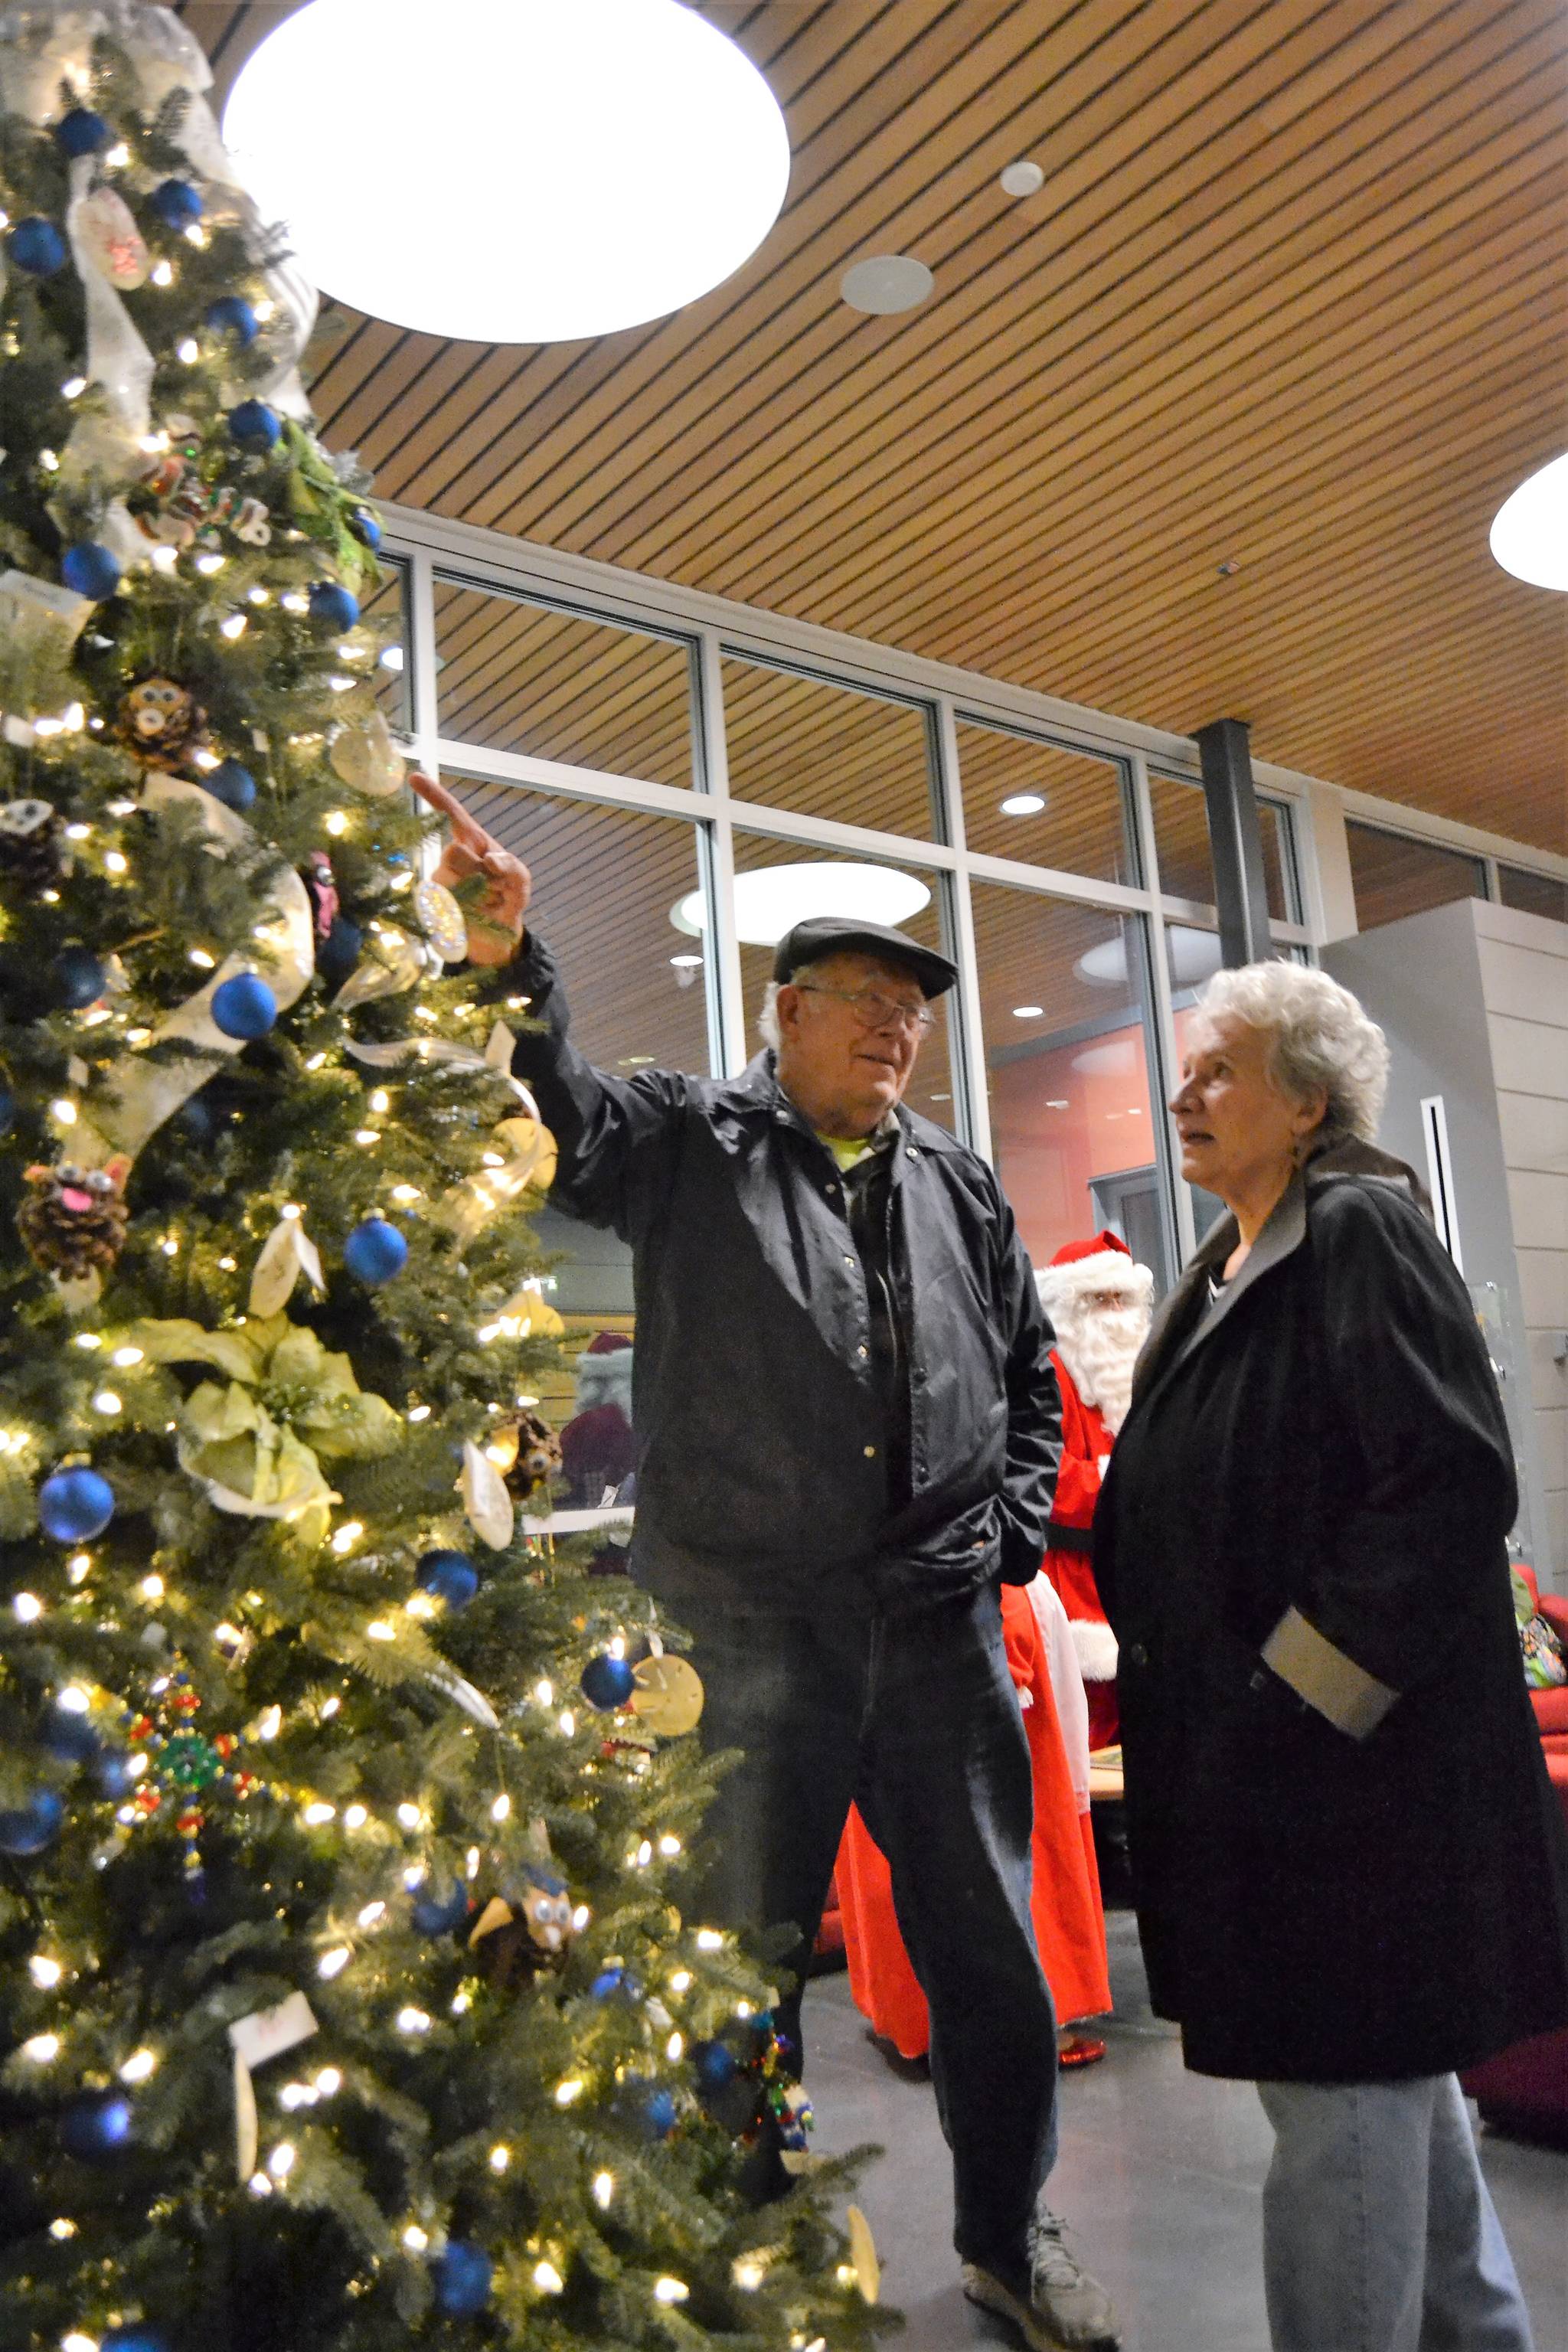 Bob and Elaine Caldwell of Sequim take a closer look at the ornaments on Dec. 1 created for Sequim Civic Center’s Holiday tree by area fourth graders. Sequim Gazette photo by Matthew Nash